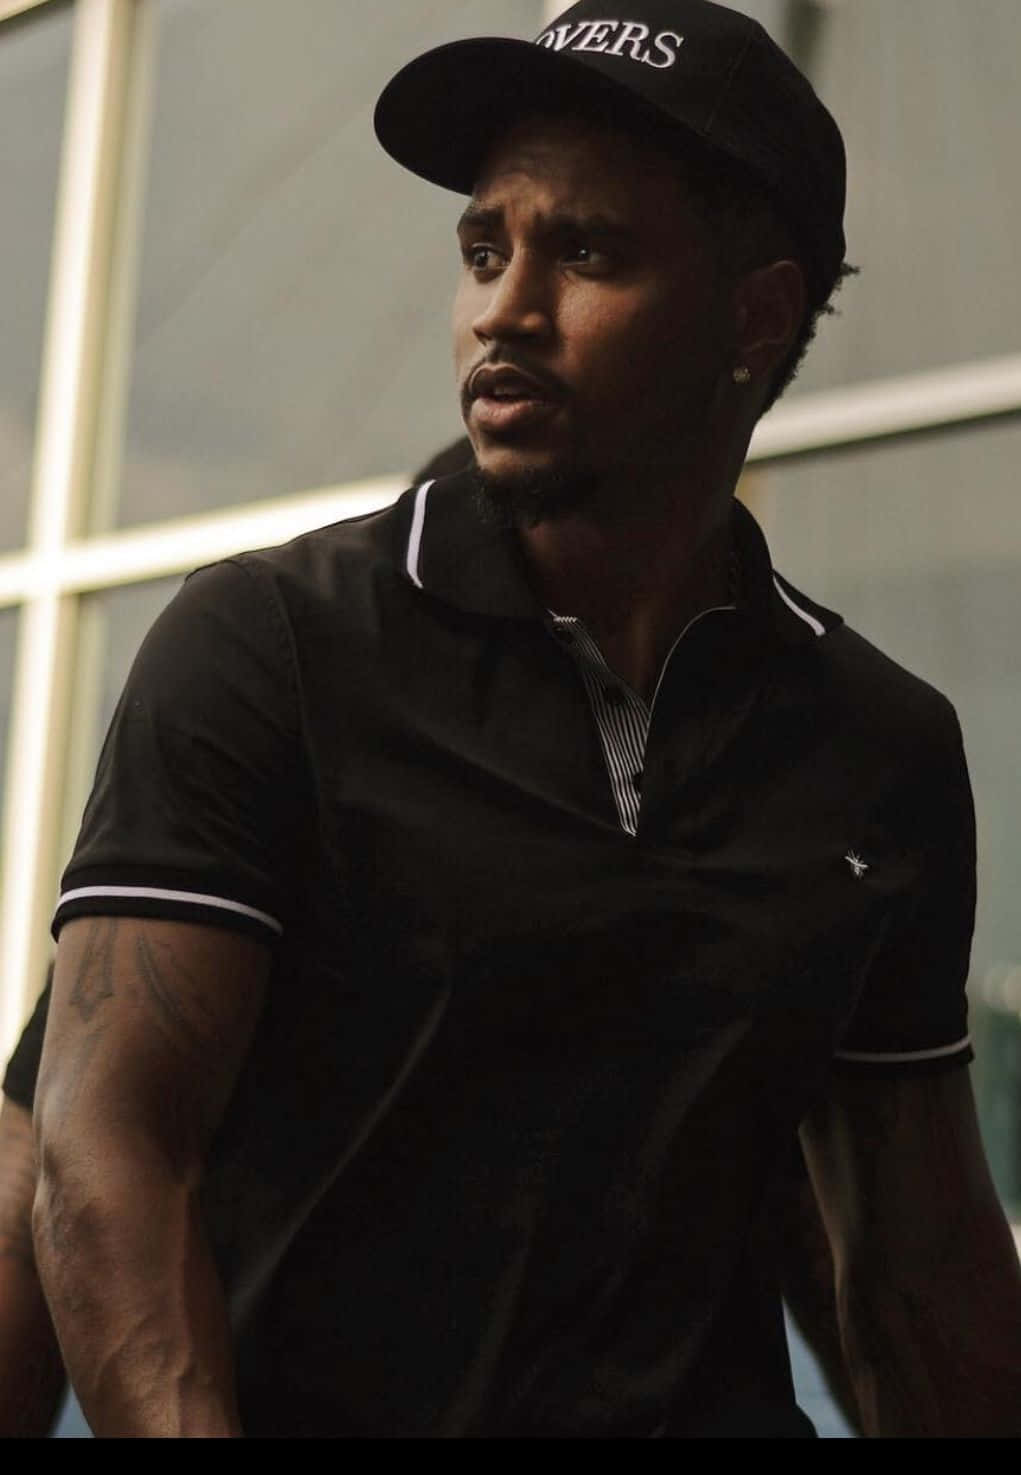 Trey Songz is the man of the moment! Wallpaper